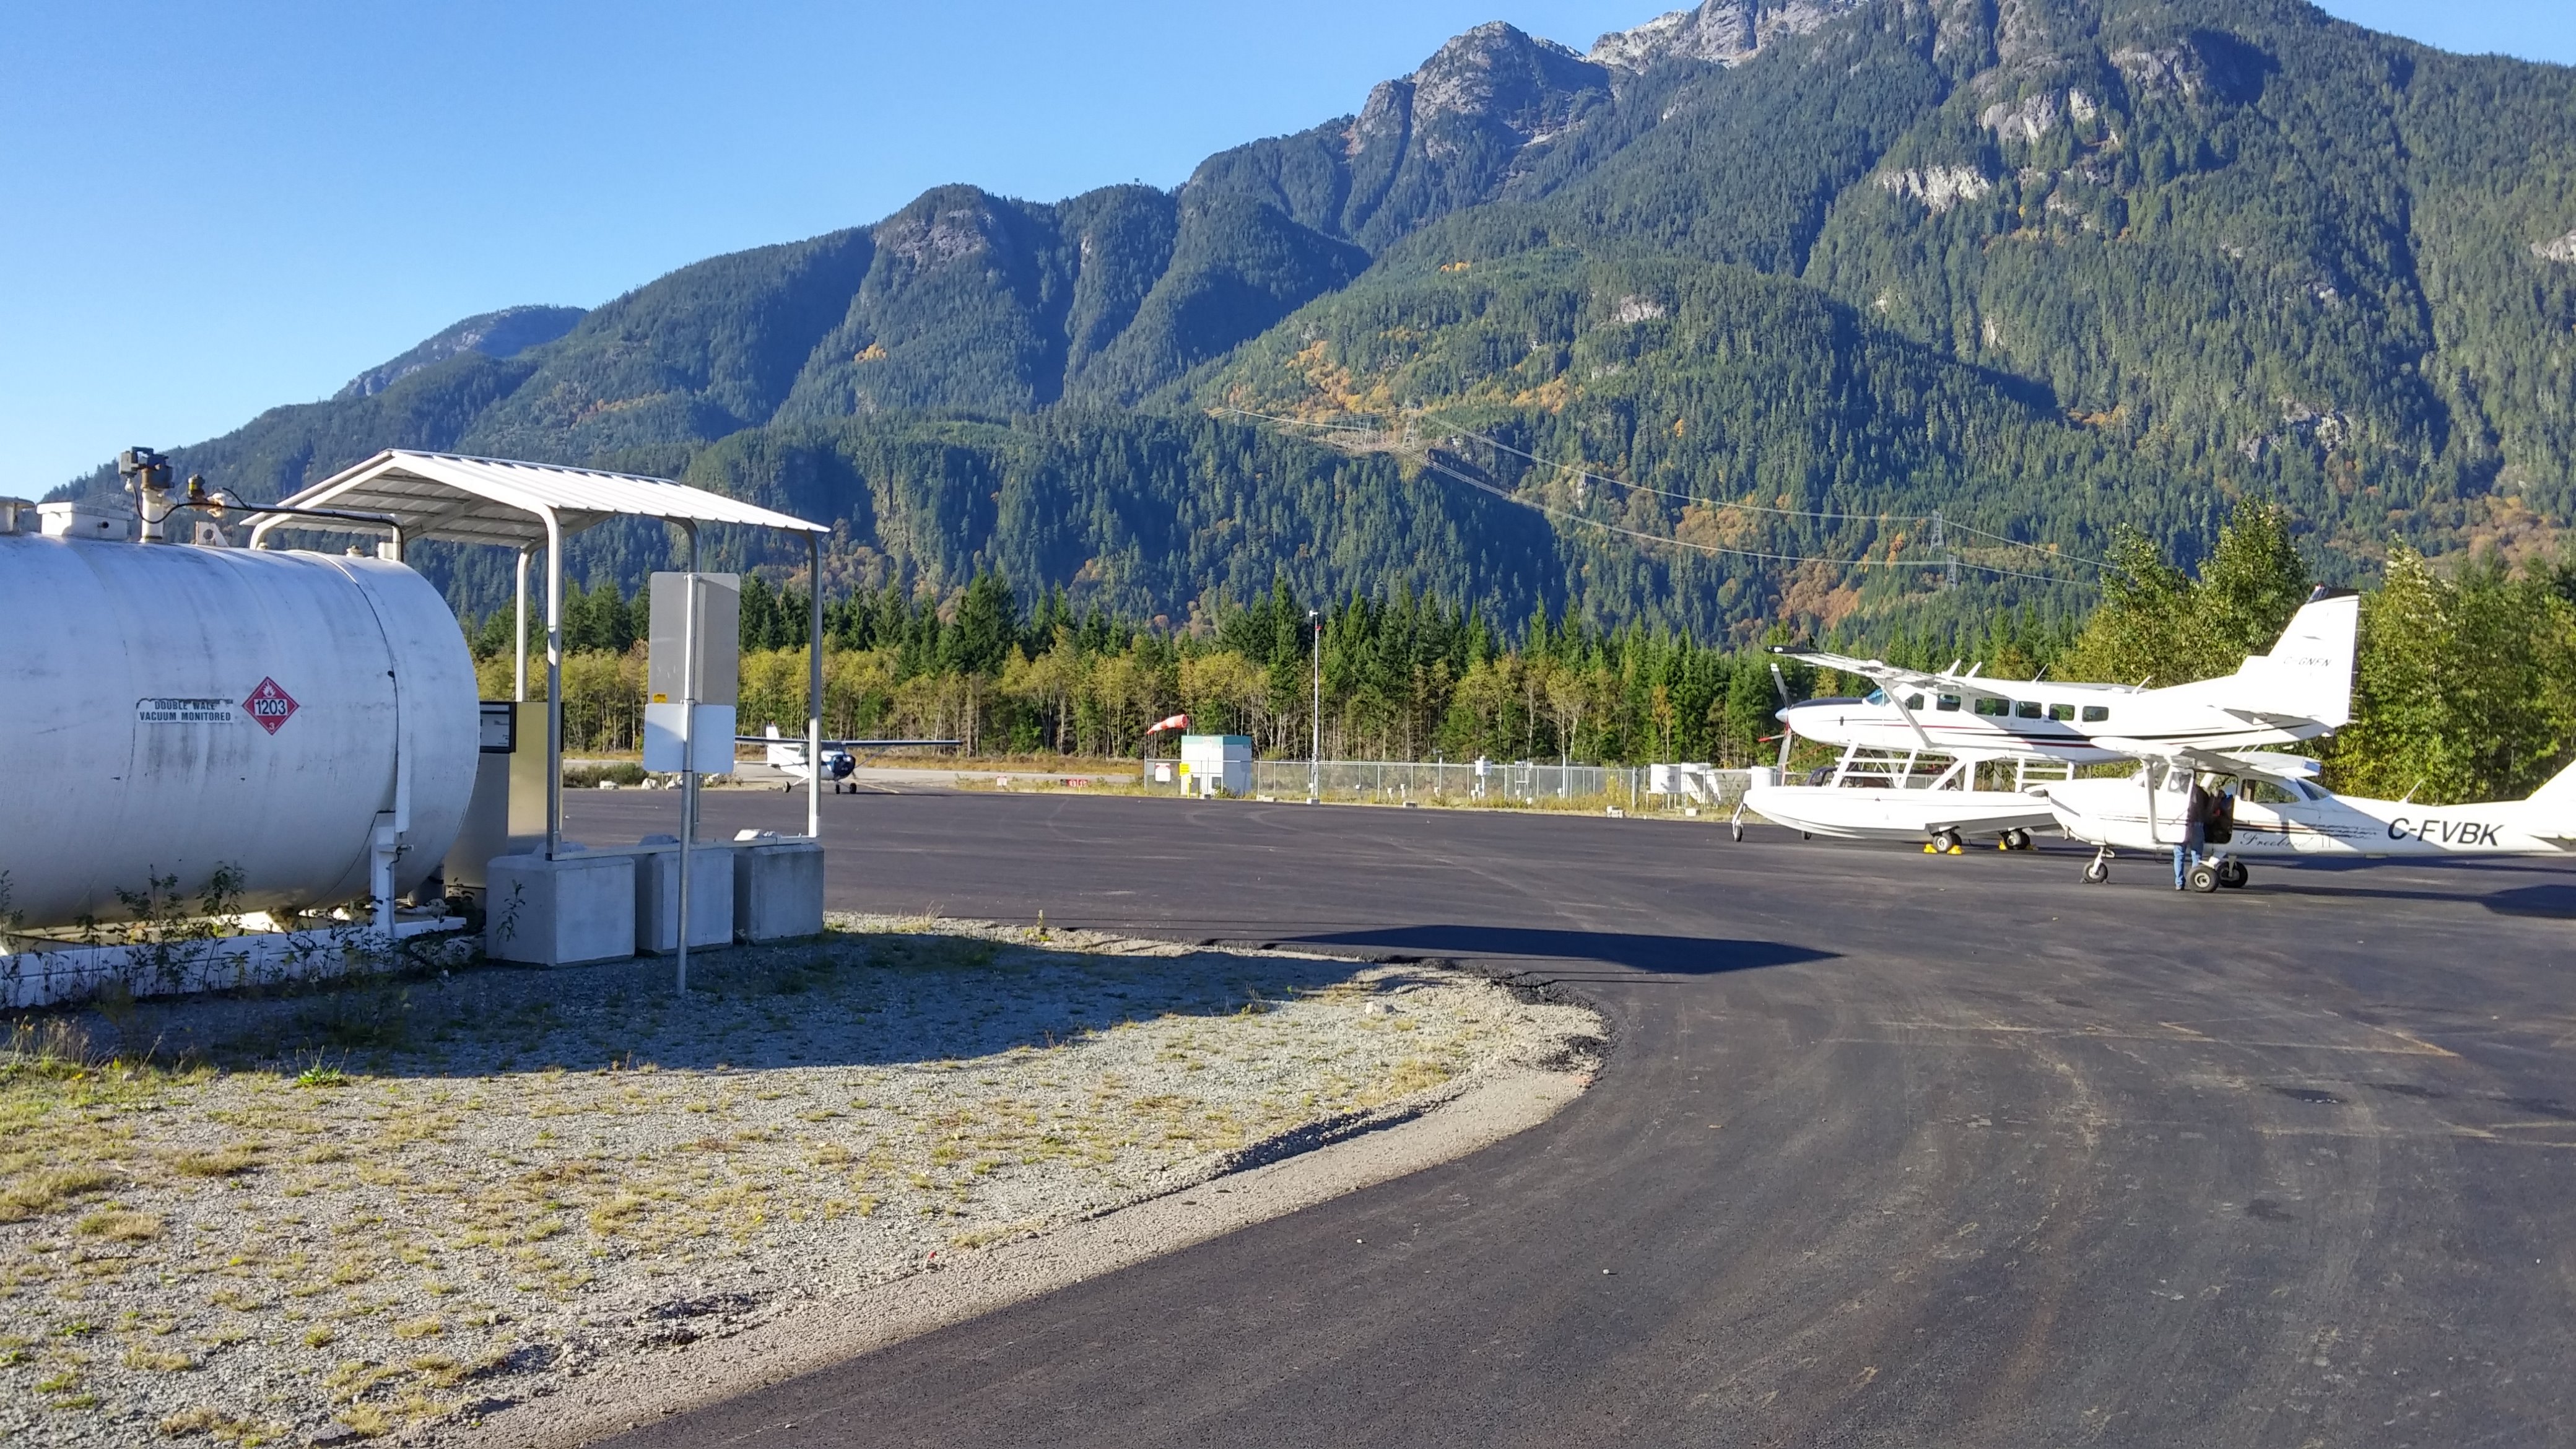 Squamish Airport - the mostly horizontal windsock is visible in the background